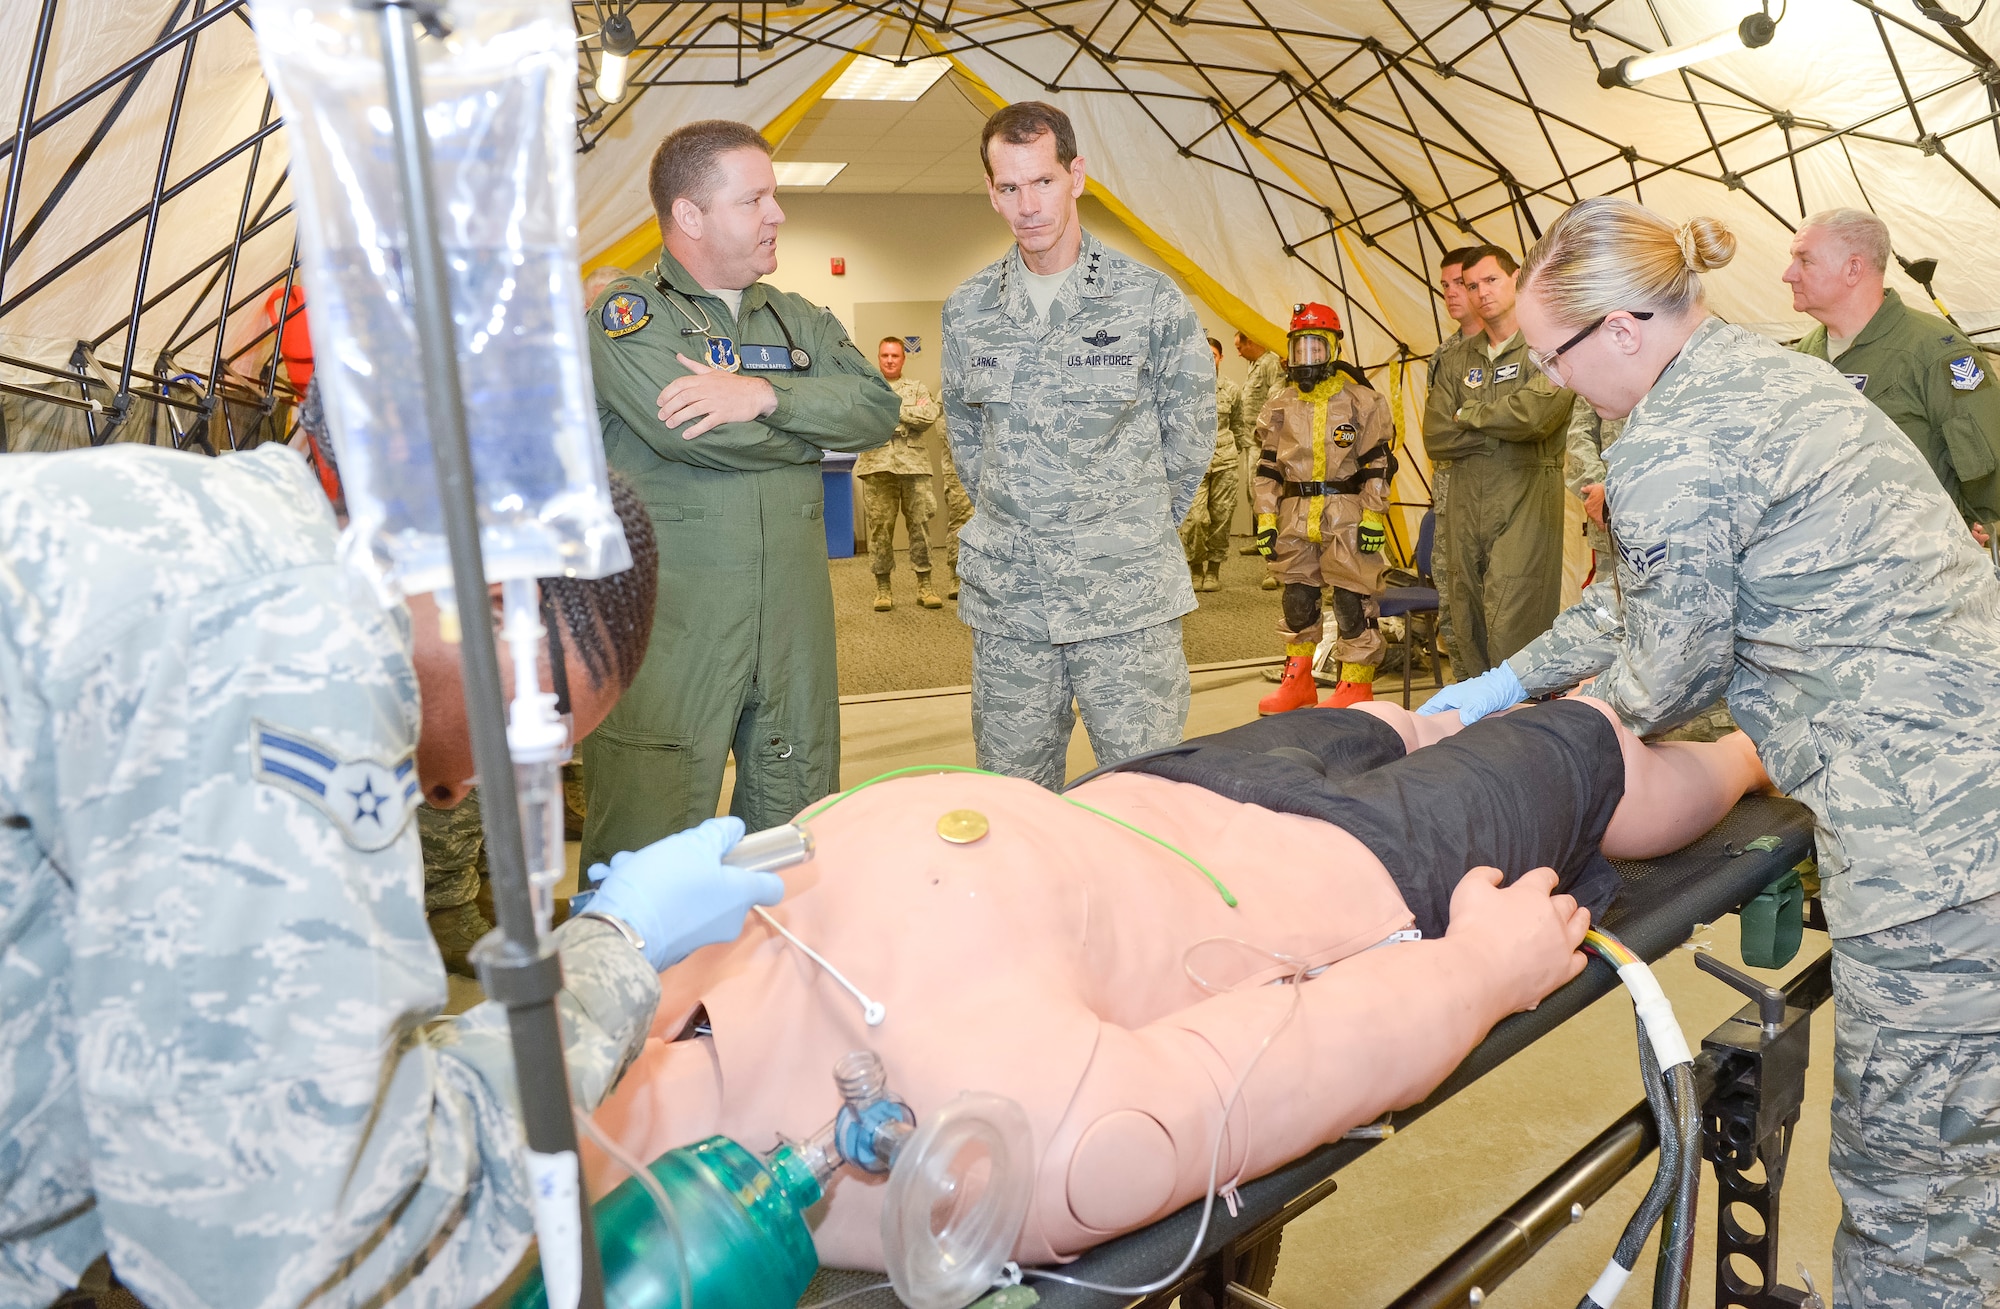 Maj. Stephen Baffic, Homeland Response Force surgeon with the 116th Air Control Wing, briefs Lt. Gen. Stanley E. Clarke III, director of the Air National Guard, during a hands-on demonstration by the 116th Medical Group's Chemical, Biological, Radiological, Nuclear and Explosives Enhanced Response Force unit during Clarkes orientation visit to the JSTARS unit at Robins Air Force Base, Ga., July 3, 2013.  The visit is Clarke's first to Team JSTARS since becoming director of the Air National Guard.  During the visit Clarke received a mission orientation, toured the E-8C and visited Airmen and Soldiers throughout the unit. (U.S. Air National Guard photo by Master Sgt. Roger Parsons/Released)